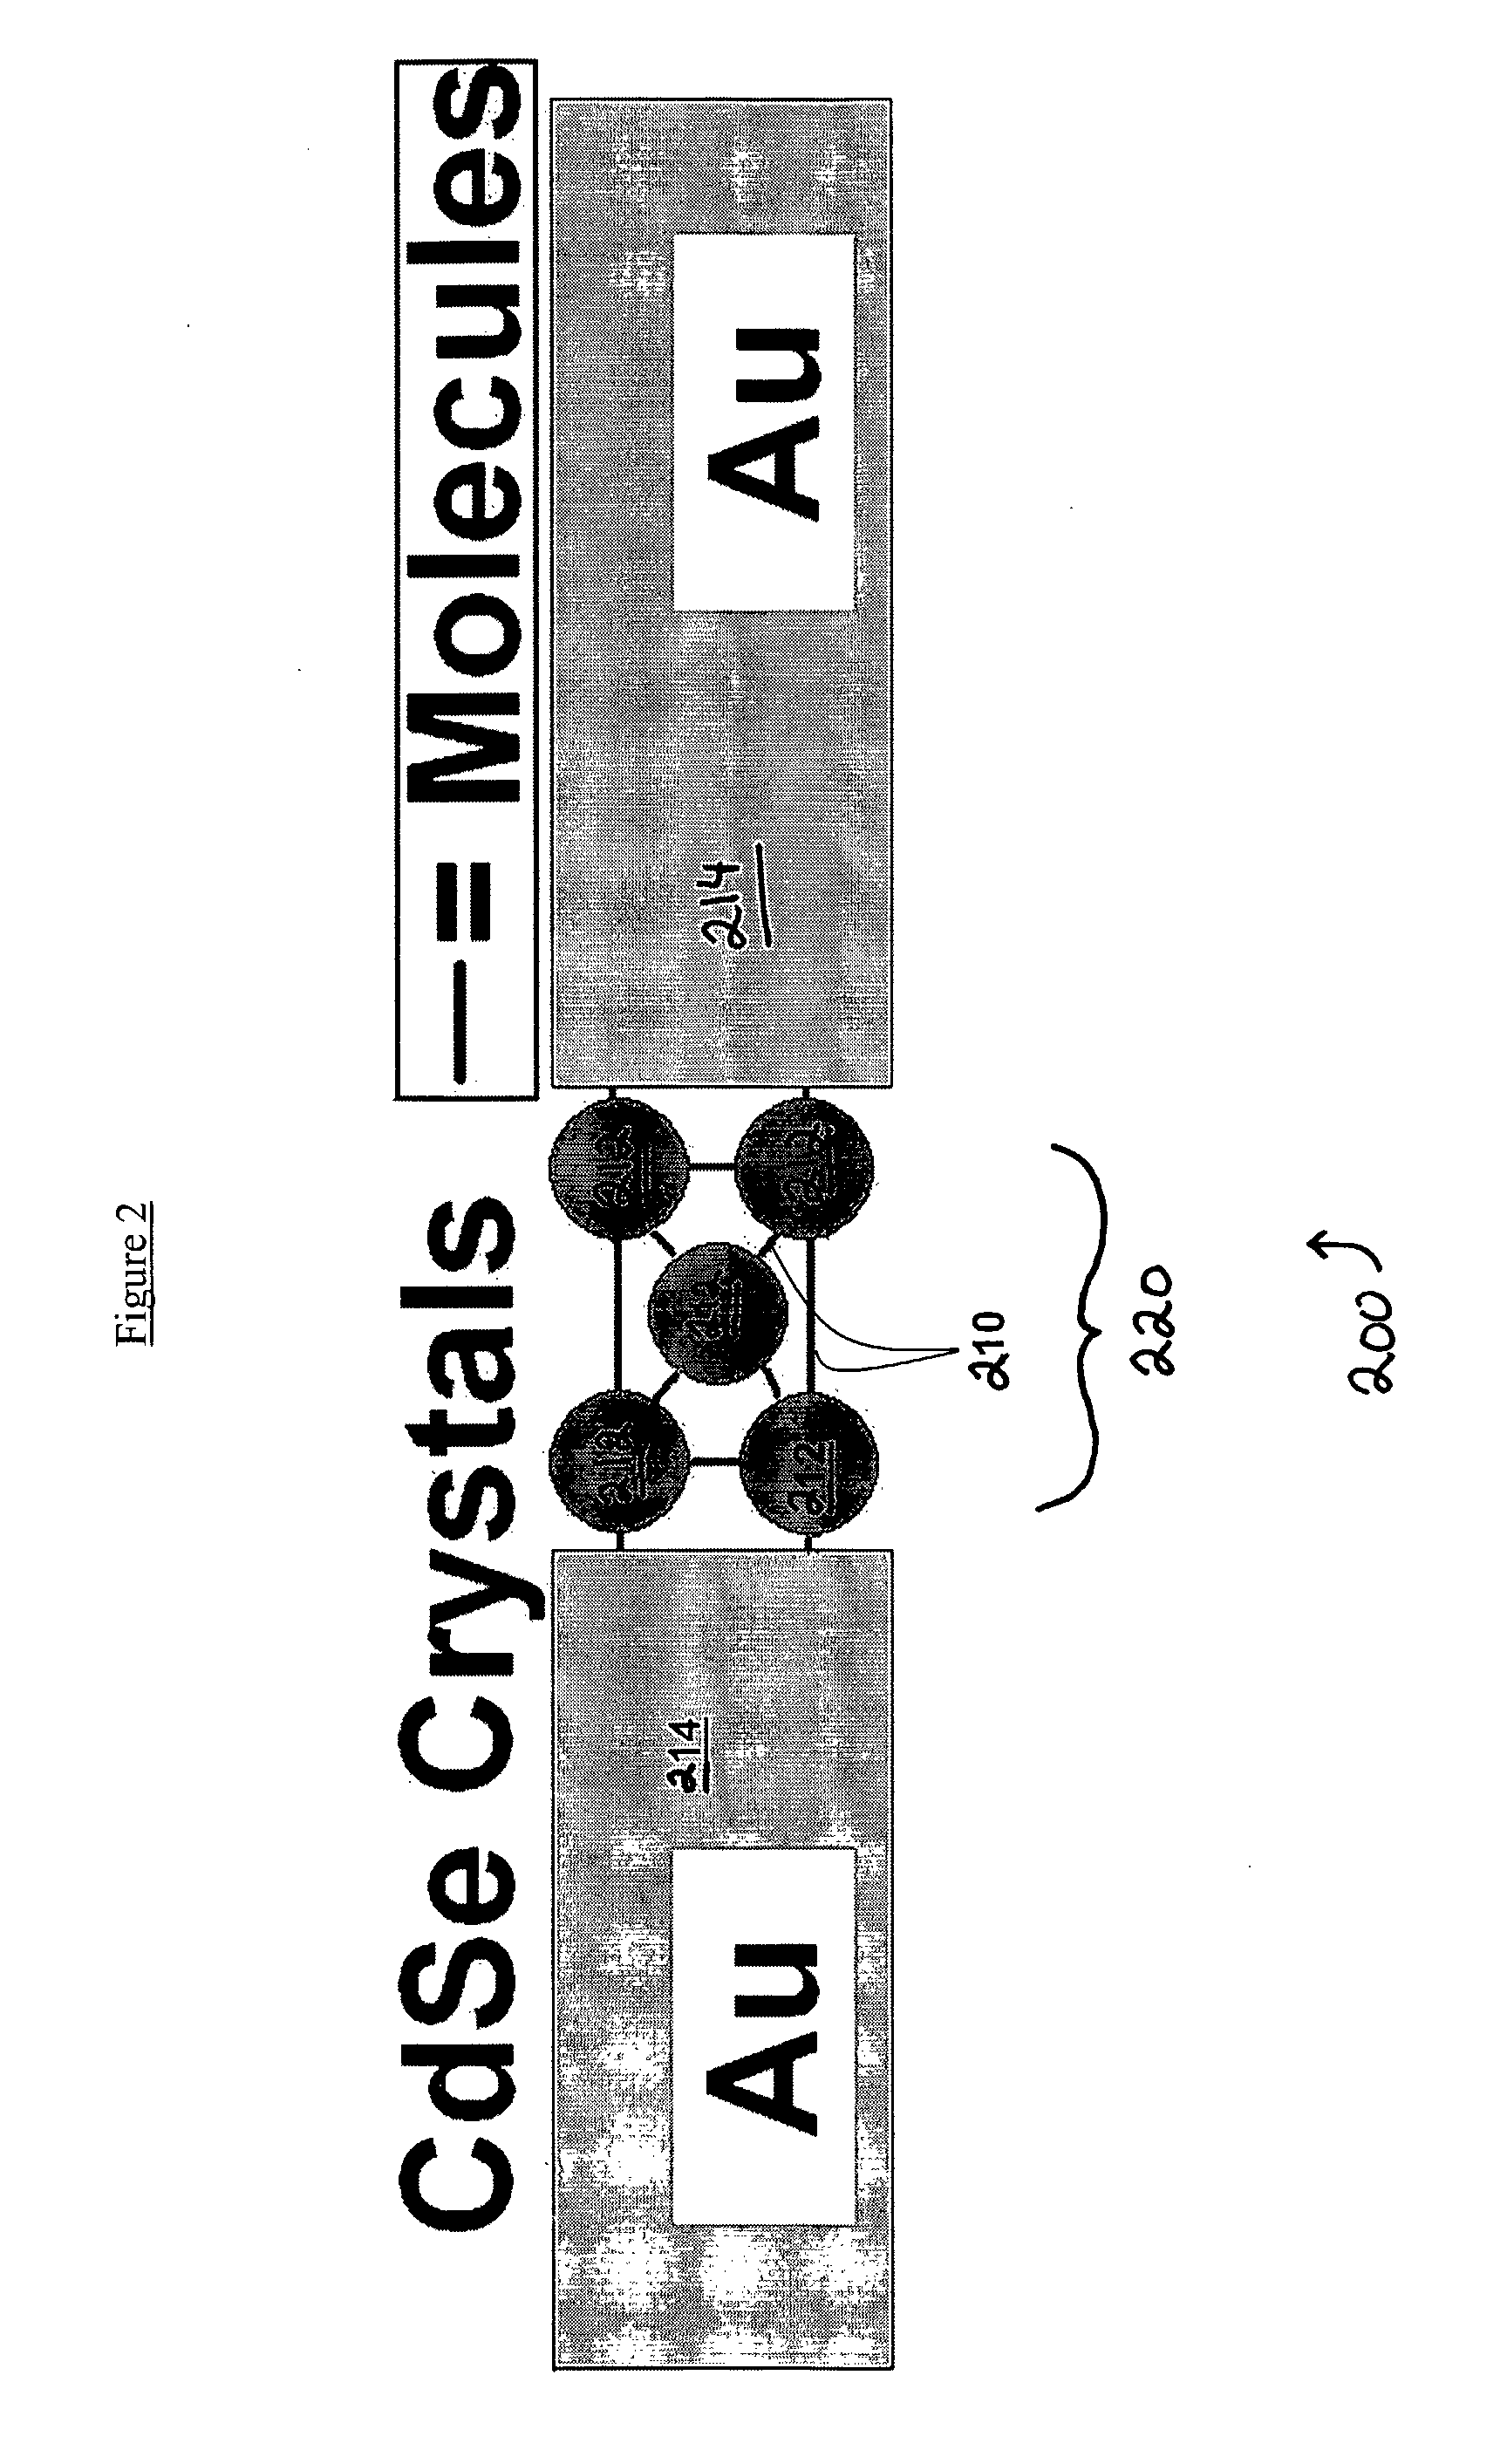 Nanostructure Assemblies, Methods And Devices Thereof